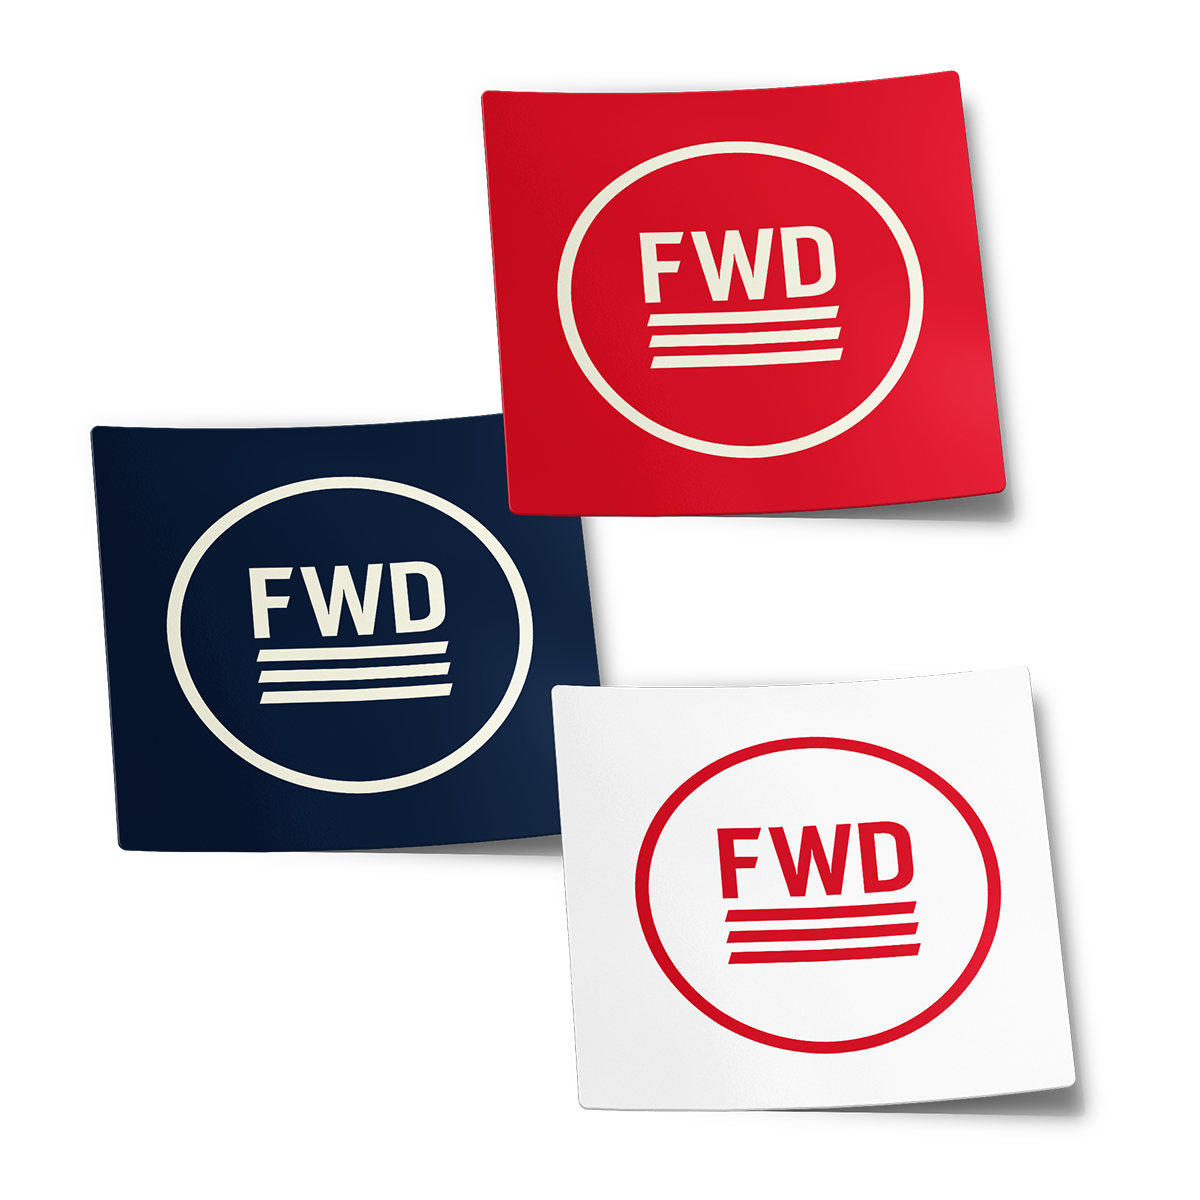 FWD Decal Pack